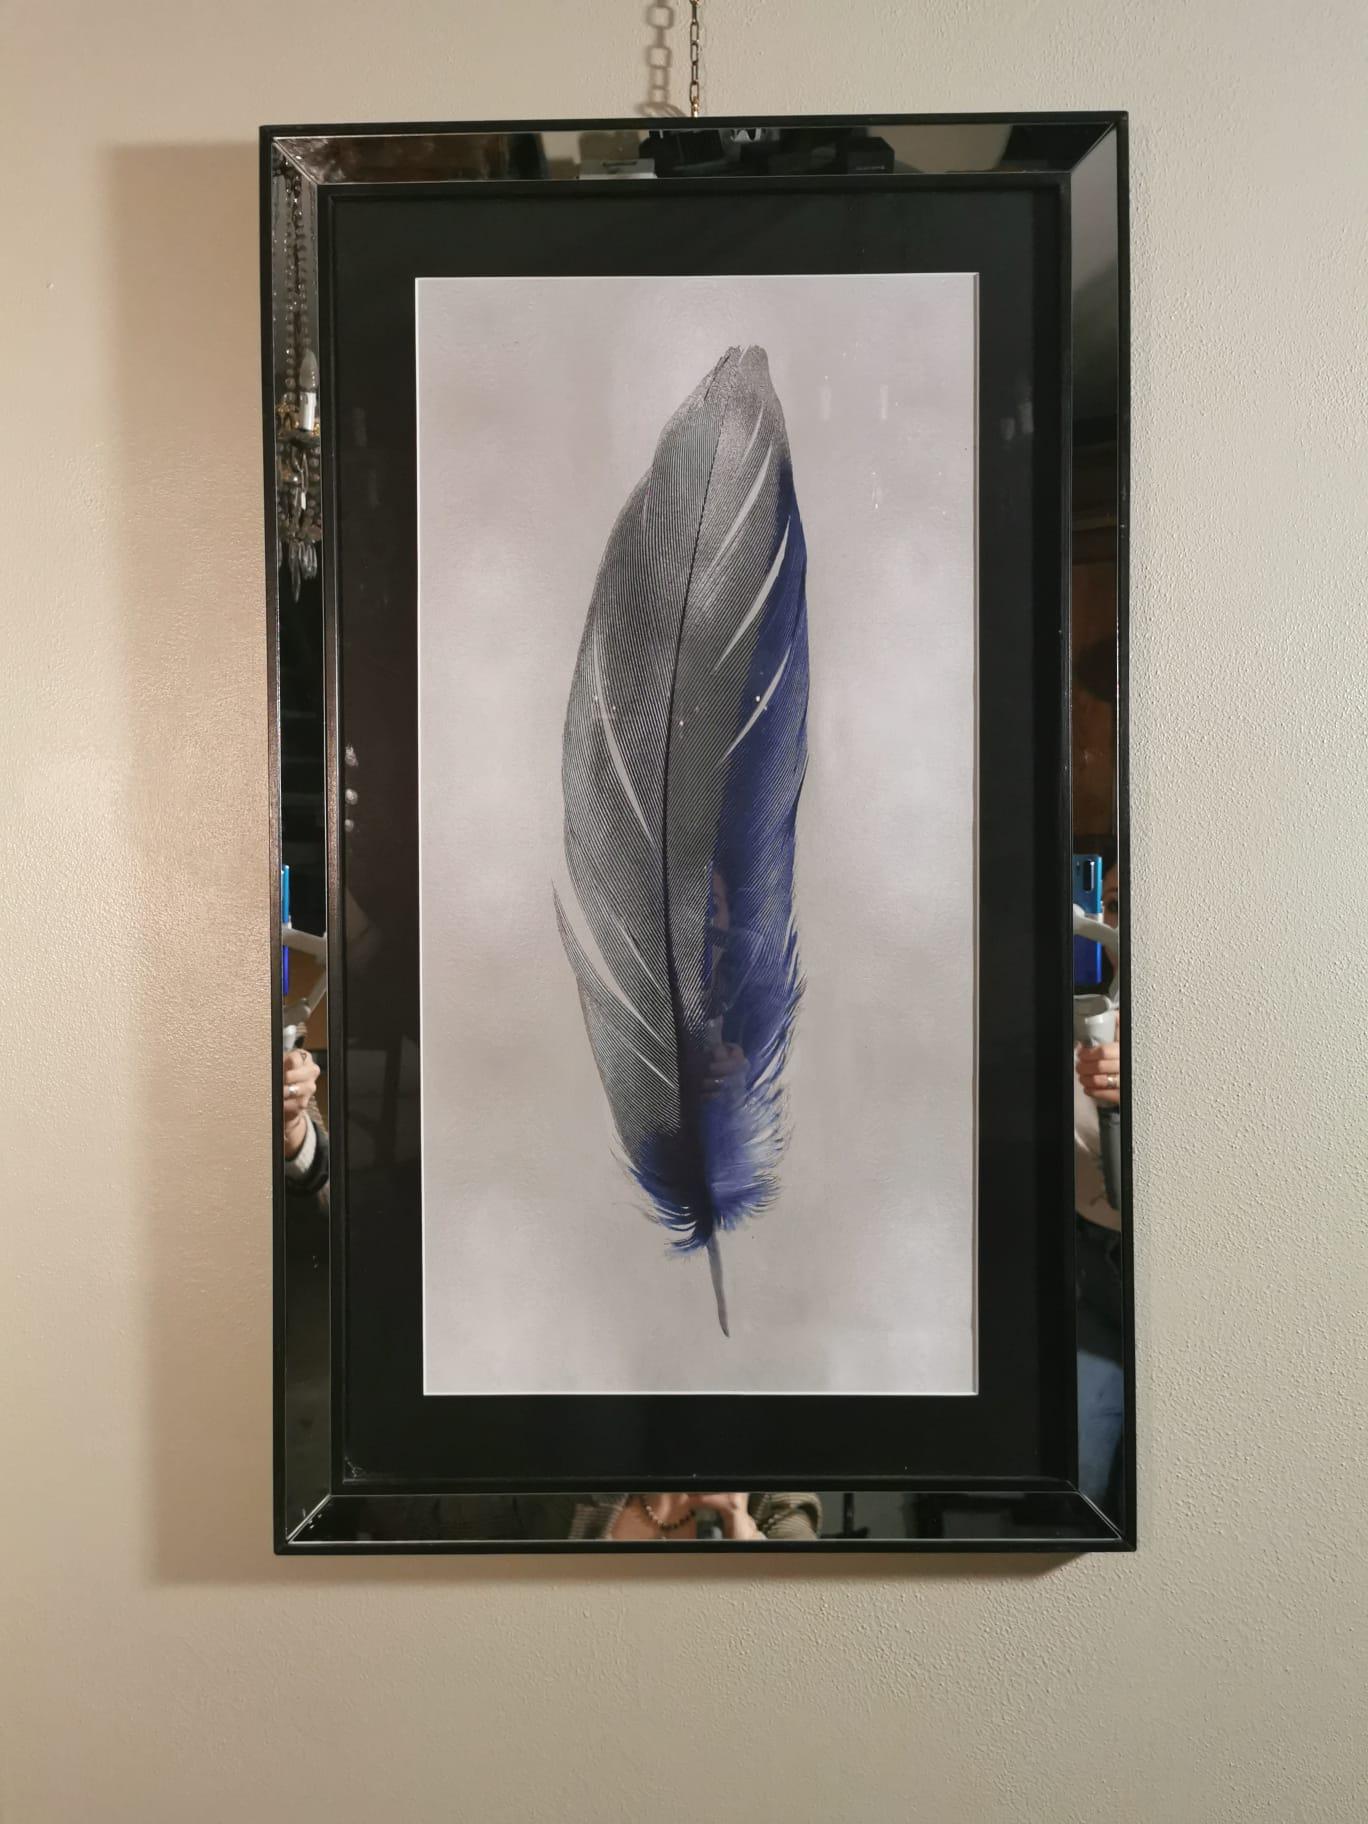 Elegant hand-coloured print representing a blue feather with black wooden frame with mirrors.
This print is made with a special technique called giclée.
The giclée printing technique is an individual high definition reproduction, printed on